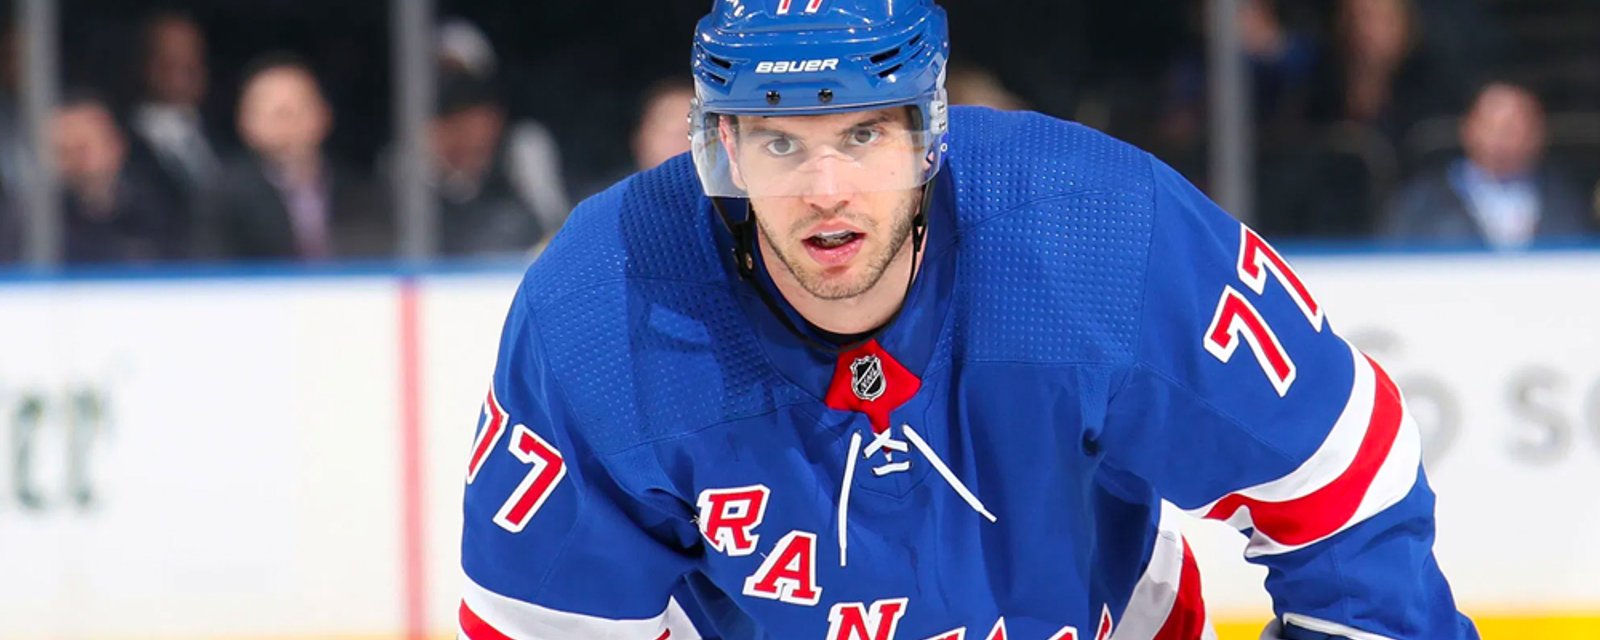 Rangers blueliner DeAngelo buys lunch for 300 hospital workers in New York City